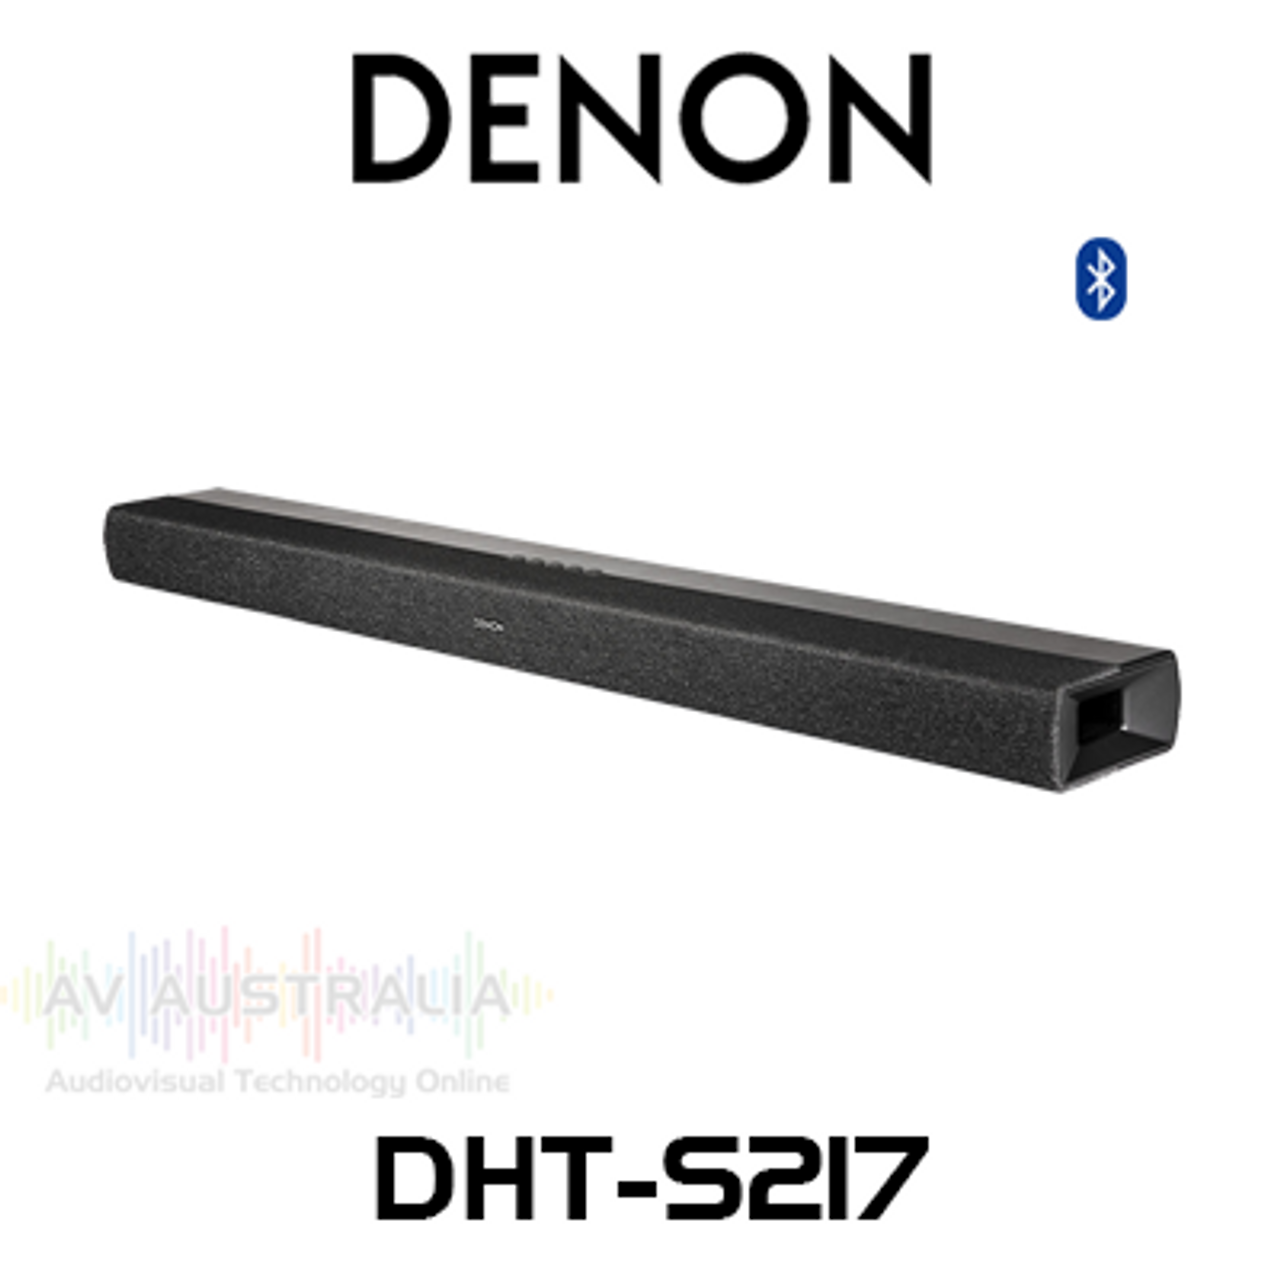 Denon DHT-S217 All-In-One Soundbar With Dolby Atmos